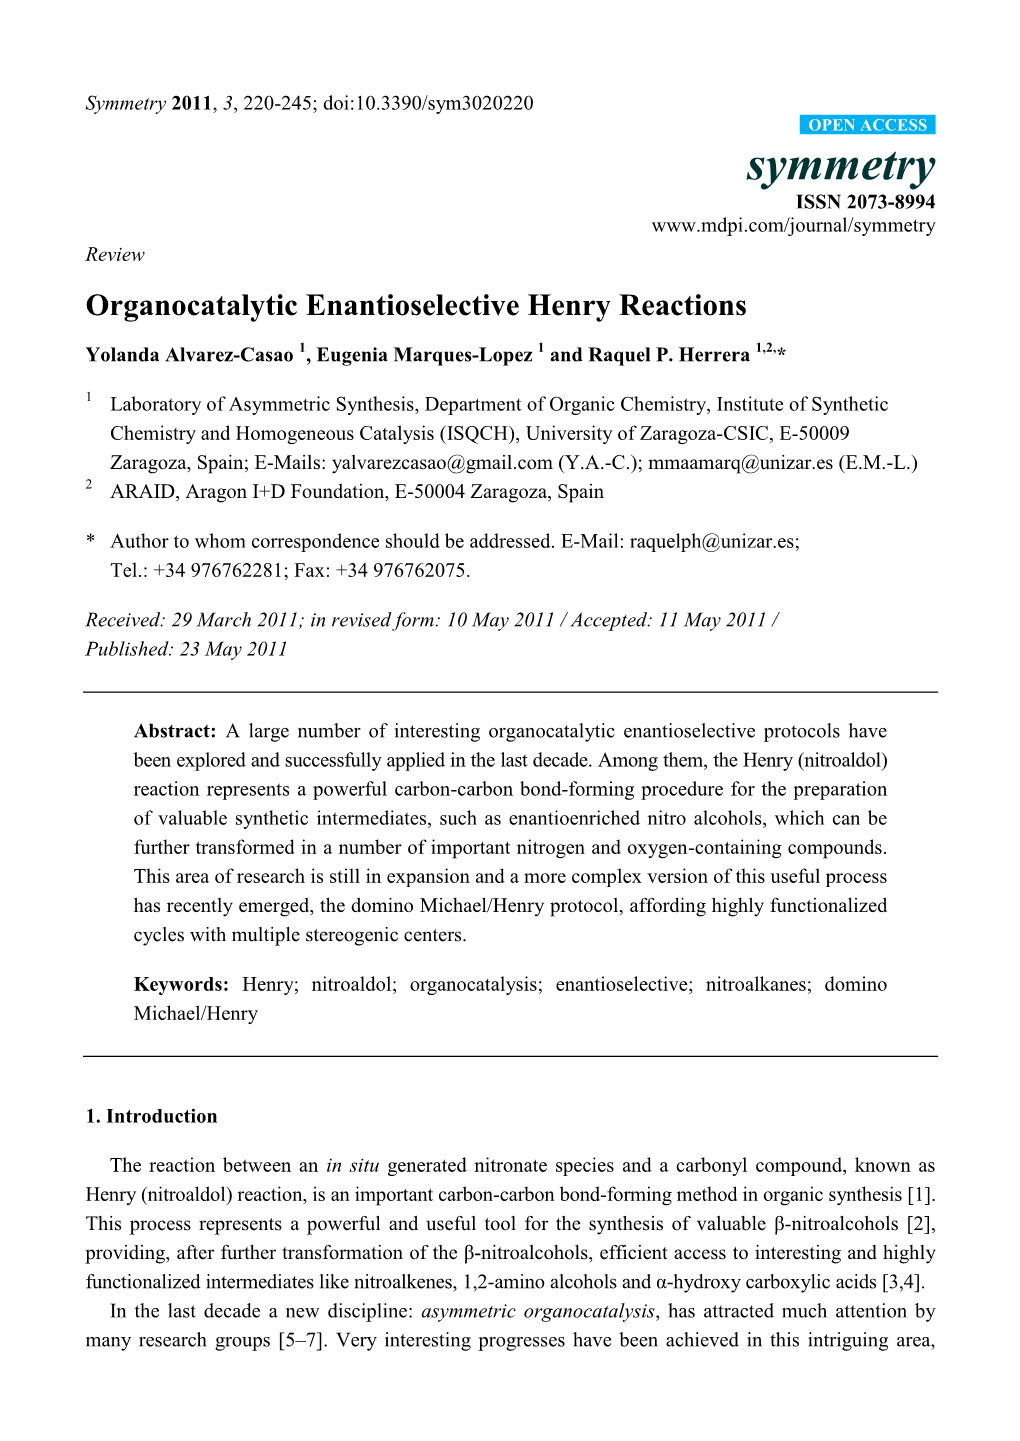 Organocatalytic Enantioselective Henry Reactions